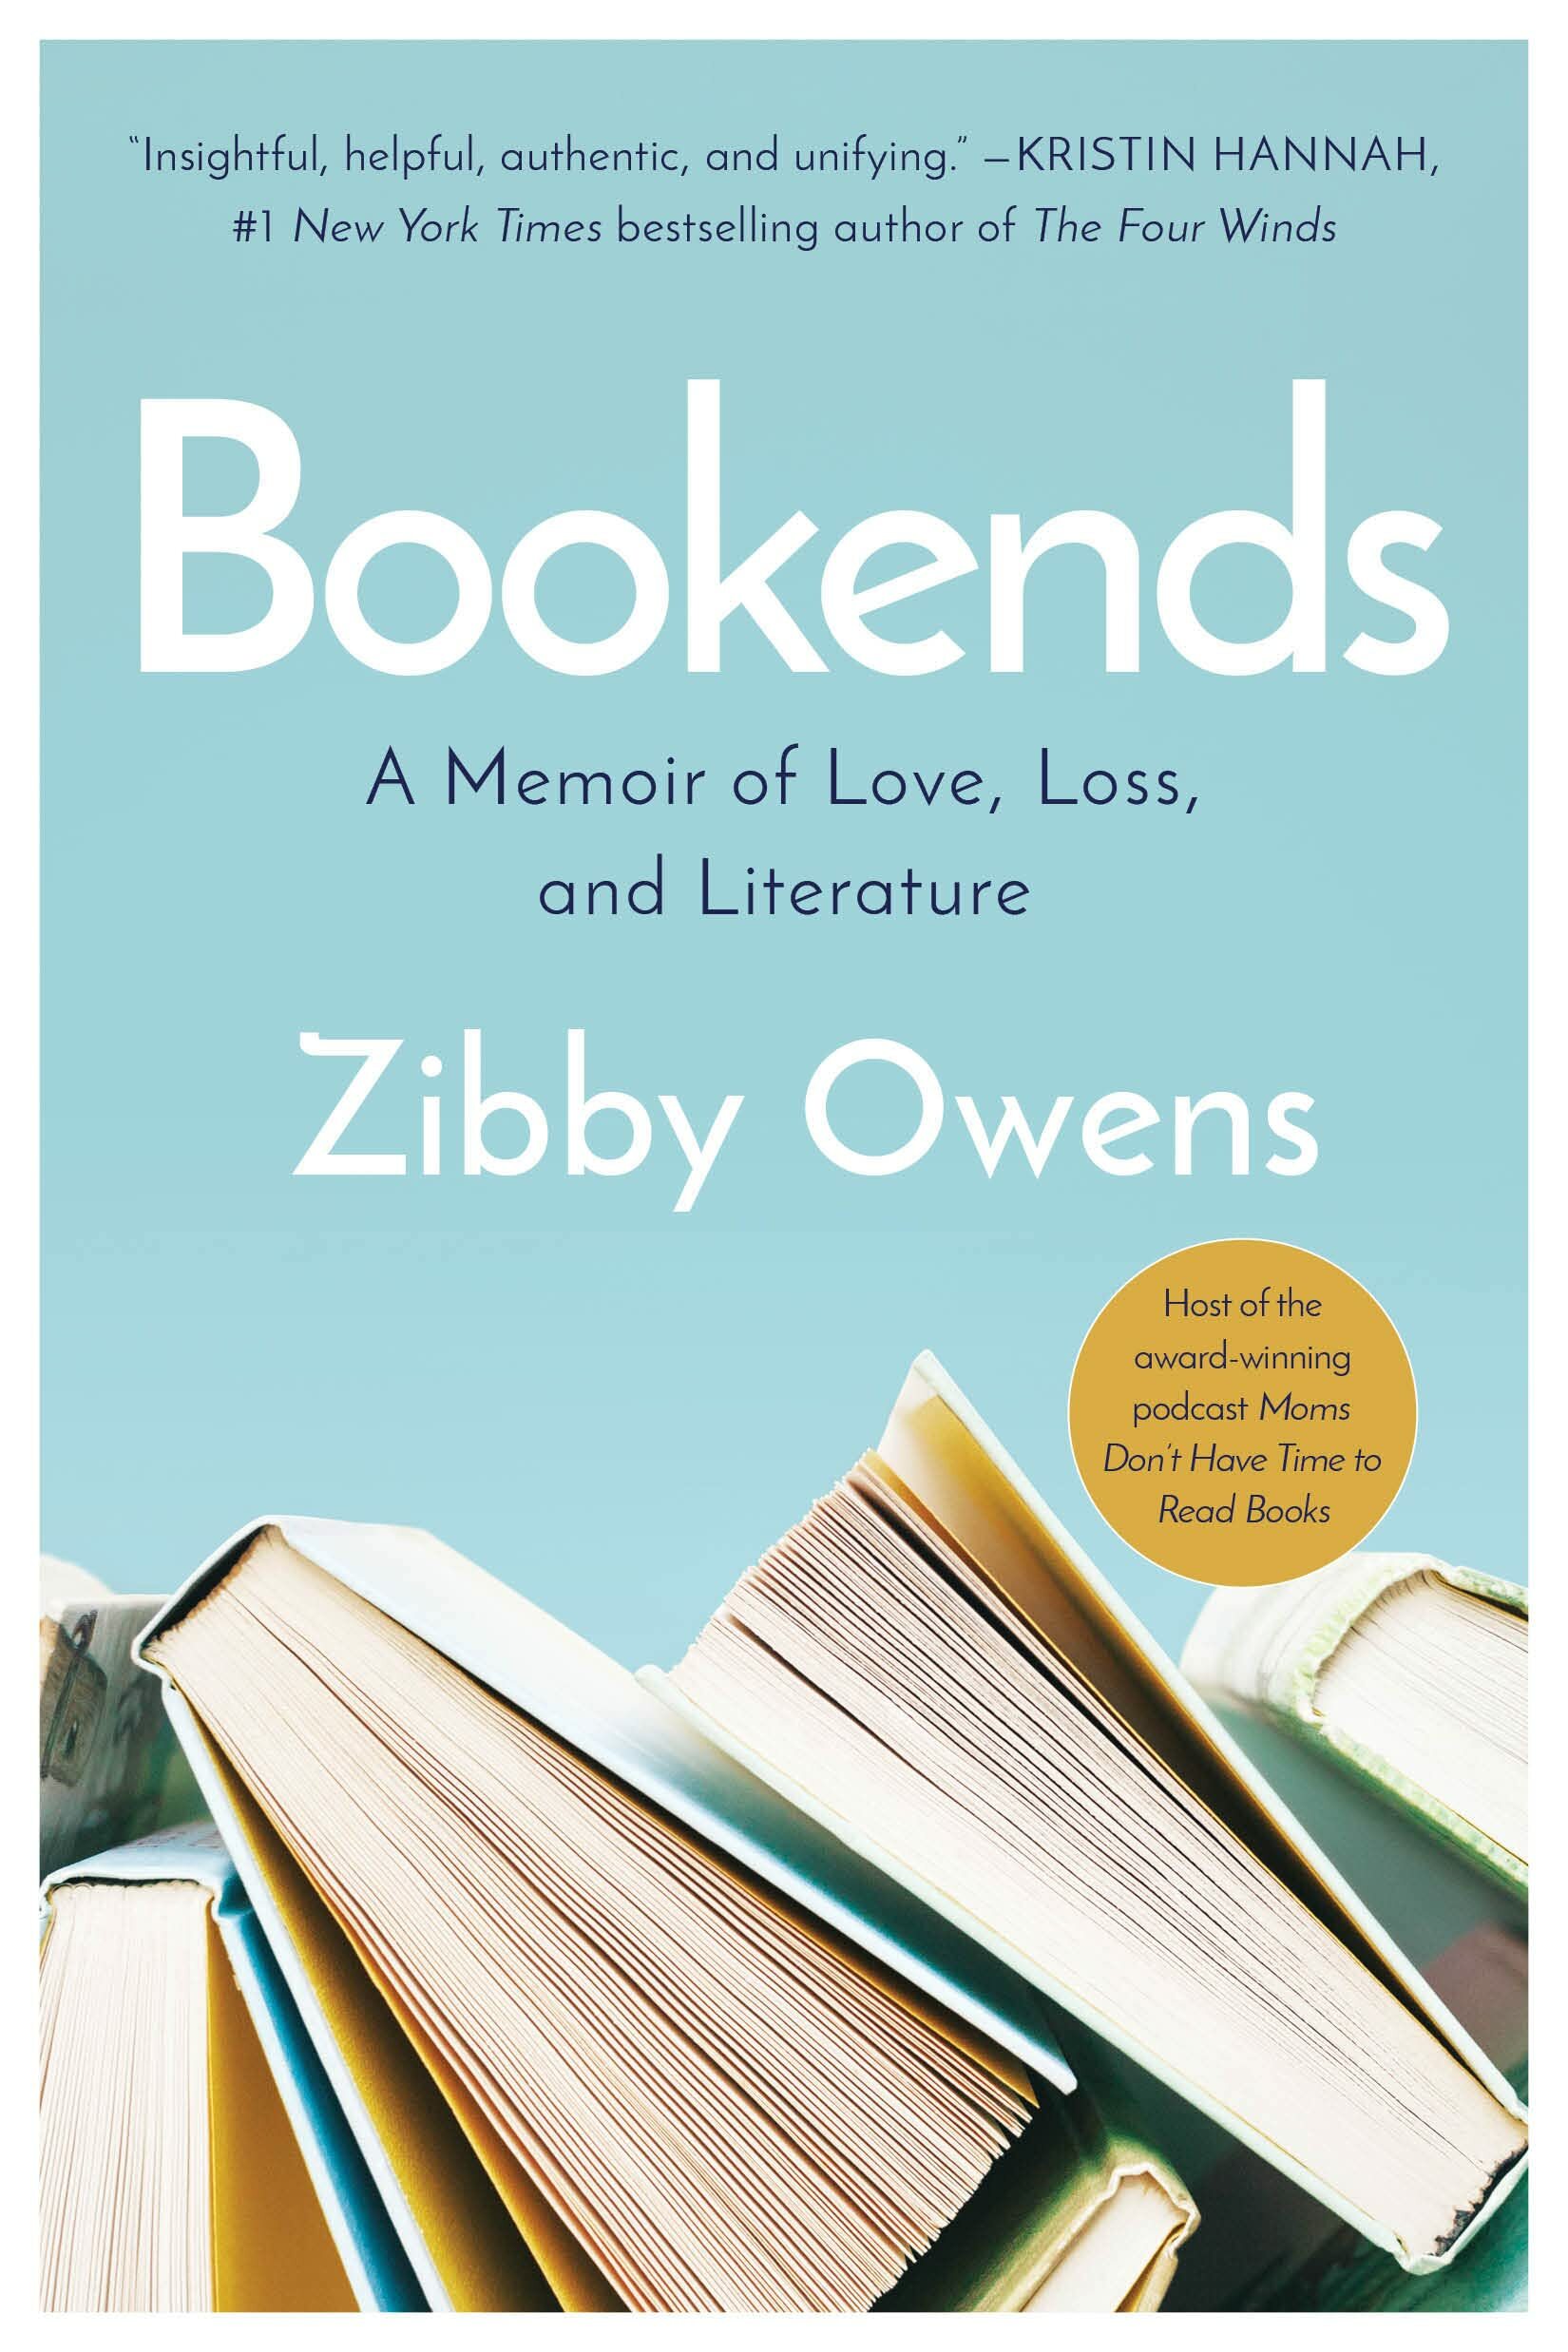 Zibby Owens discusses “Bookends: A Memoir of Love, Loss and Literature